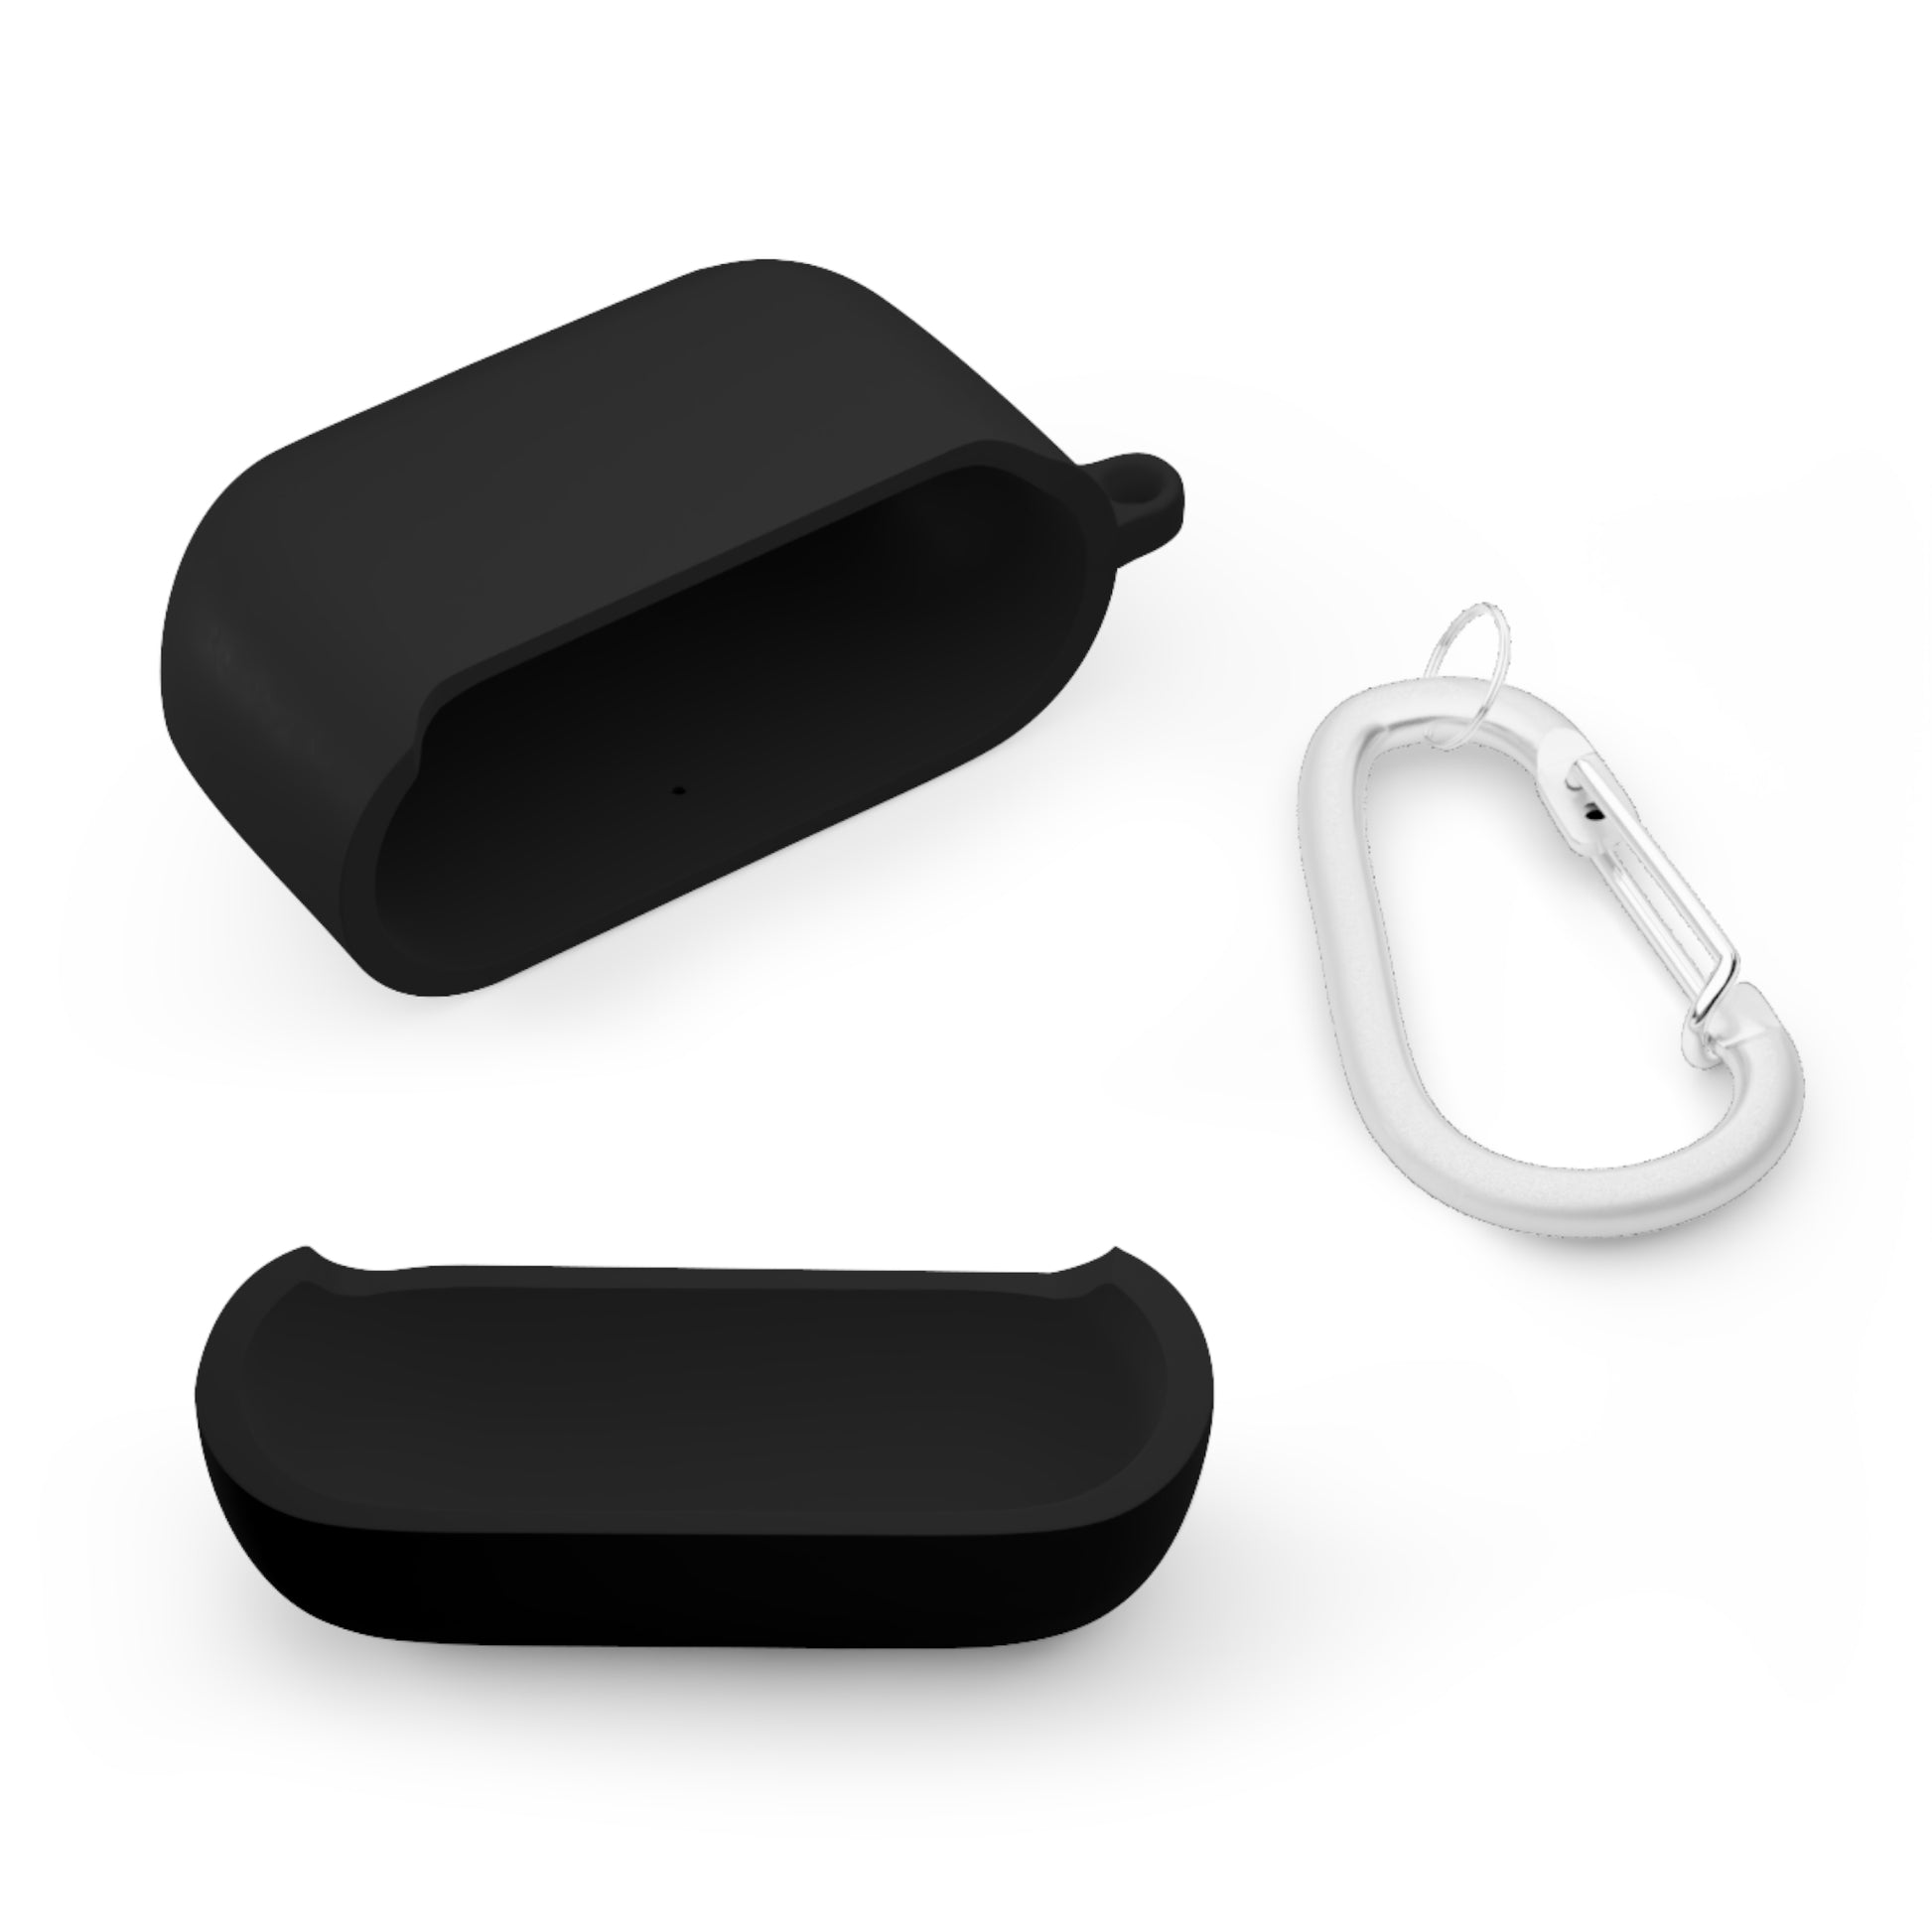 Keep Praying Christian Airpod / Airpods Pro Case cover Printify